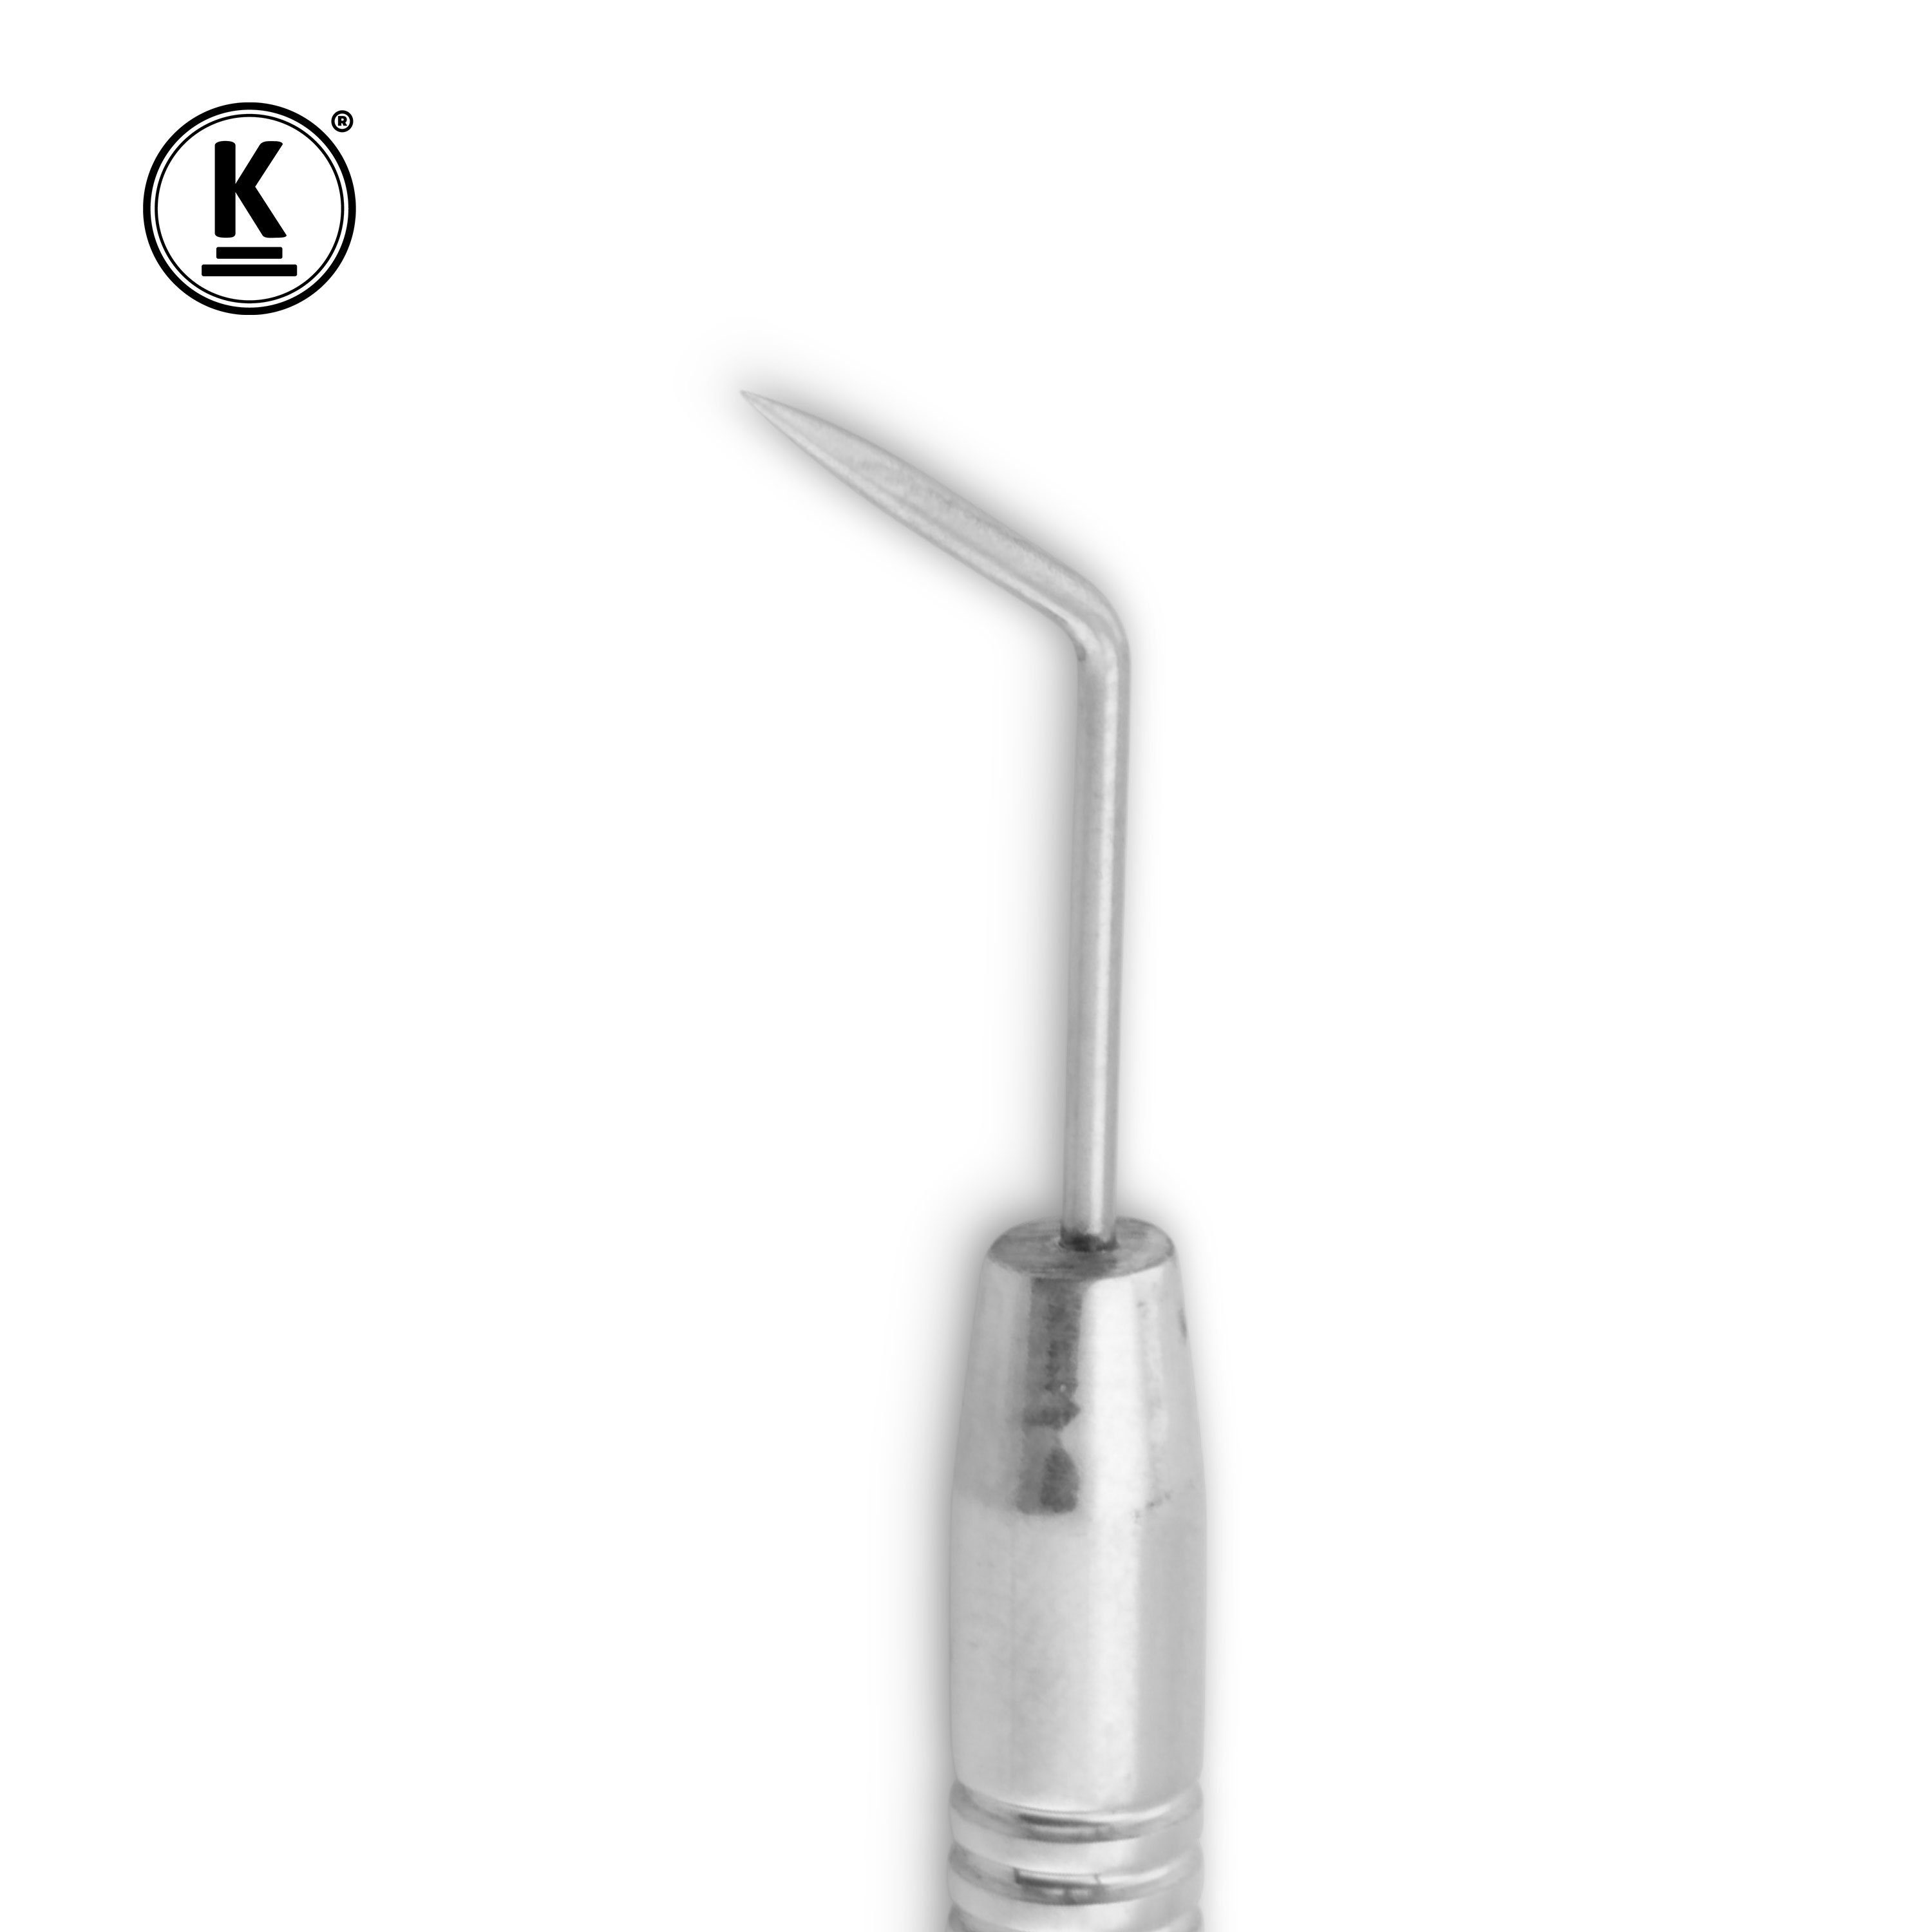 K-Pro Wimpernkamm - Lifting Kamm Wimpernlifting Wimpern Tool & Seperator